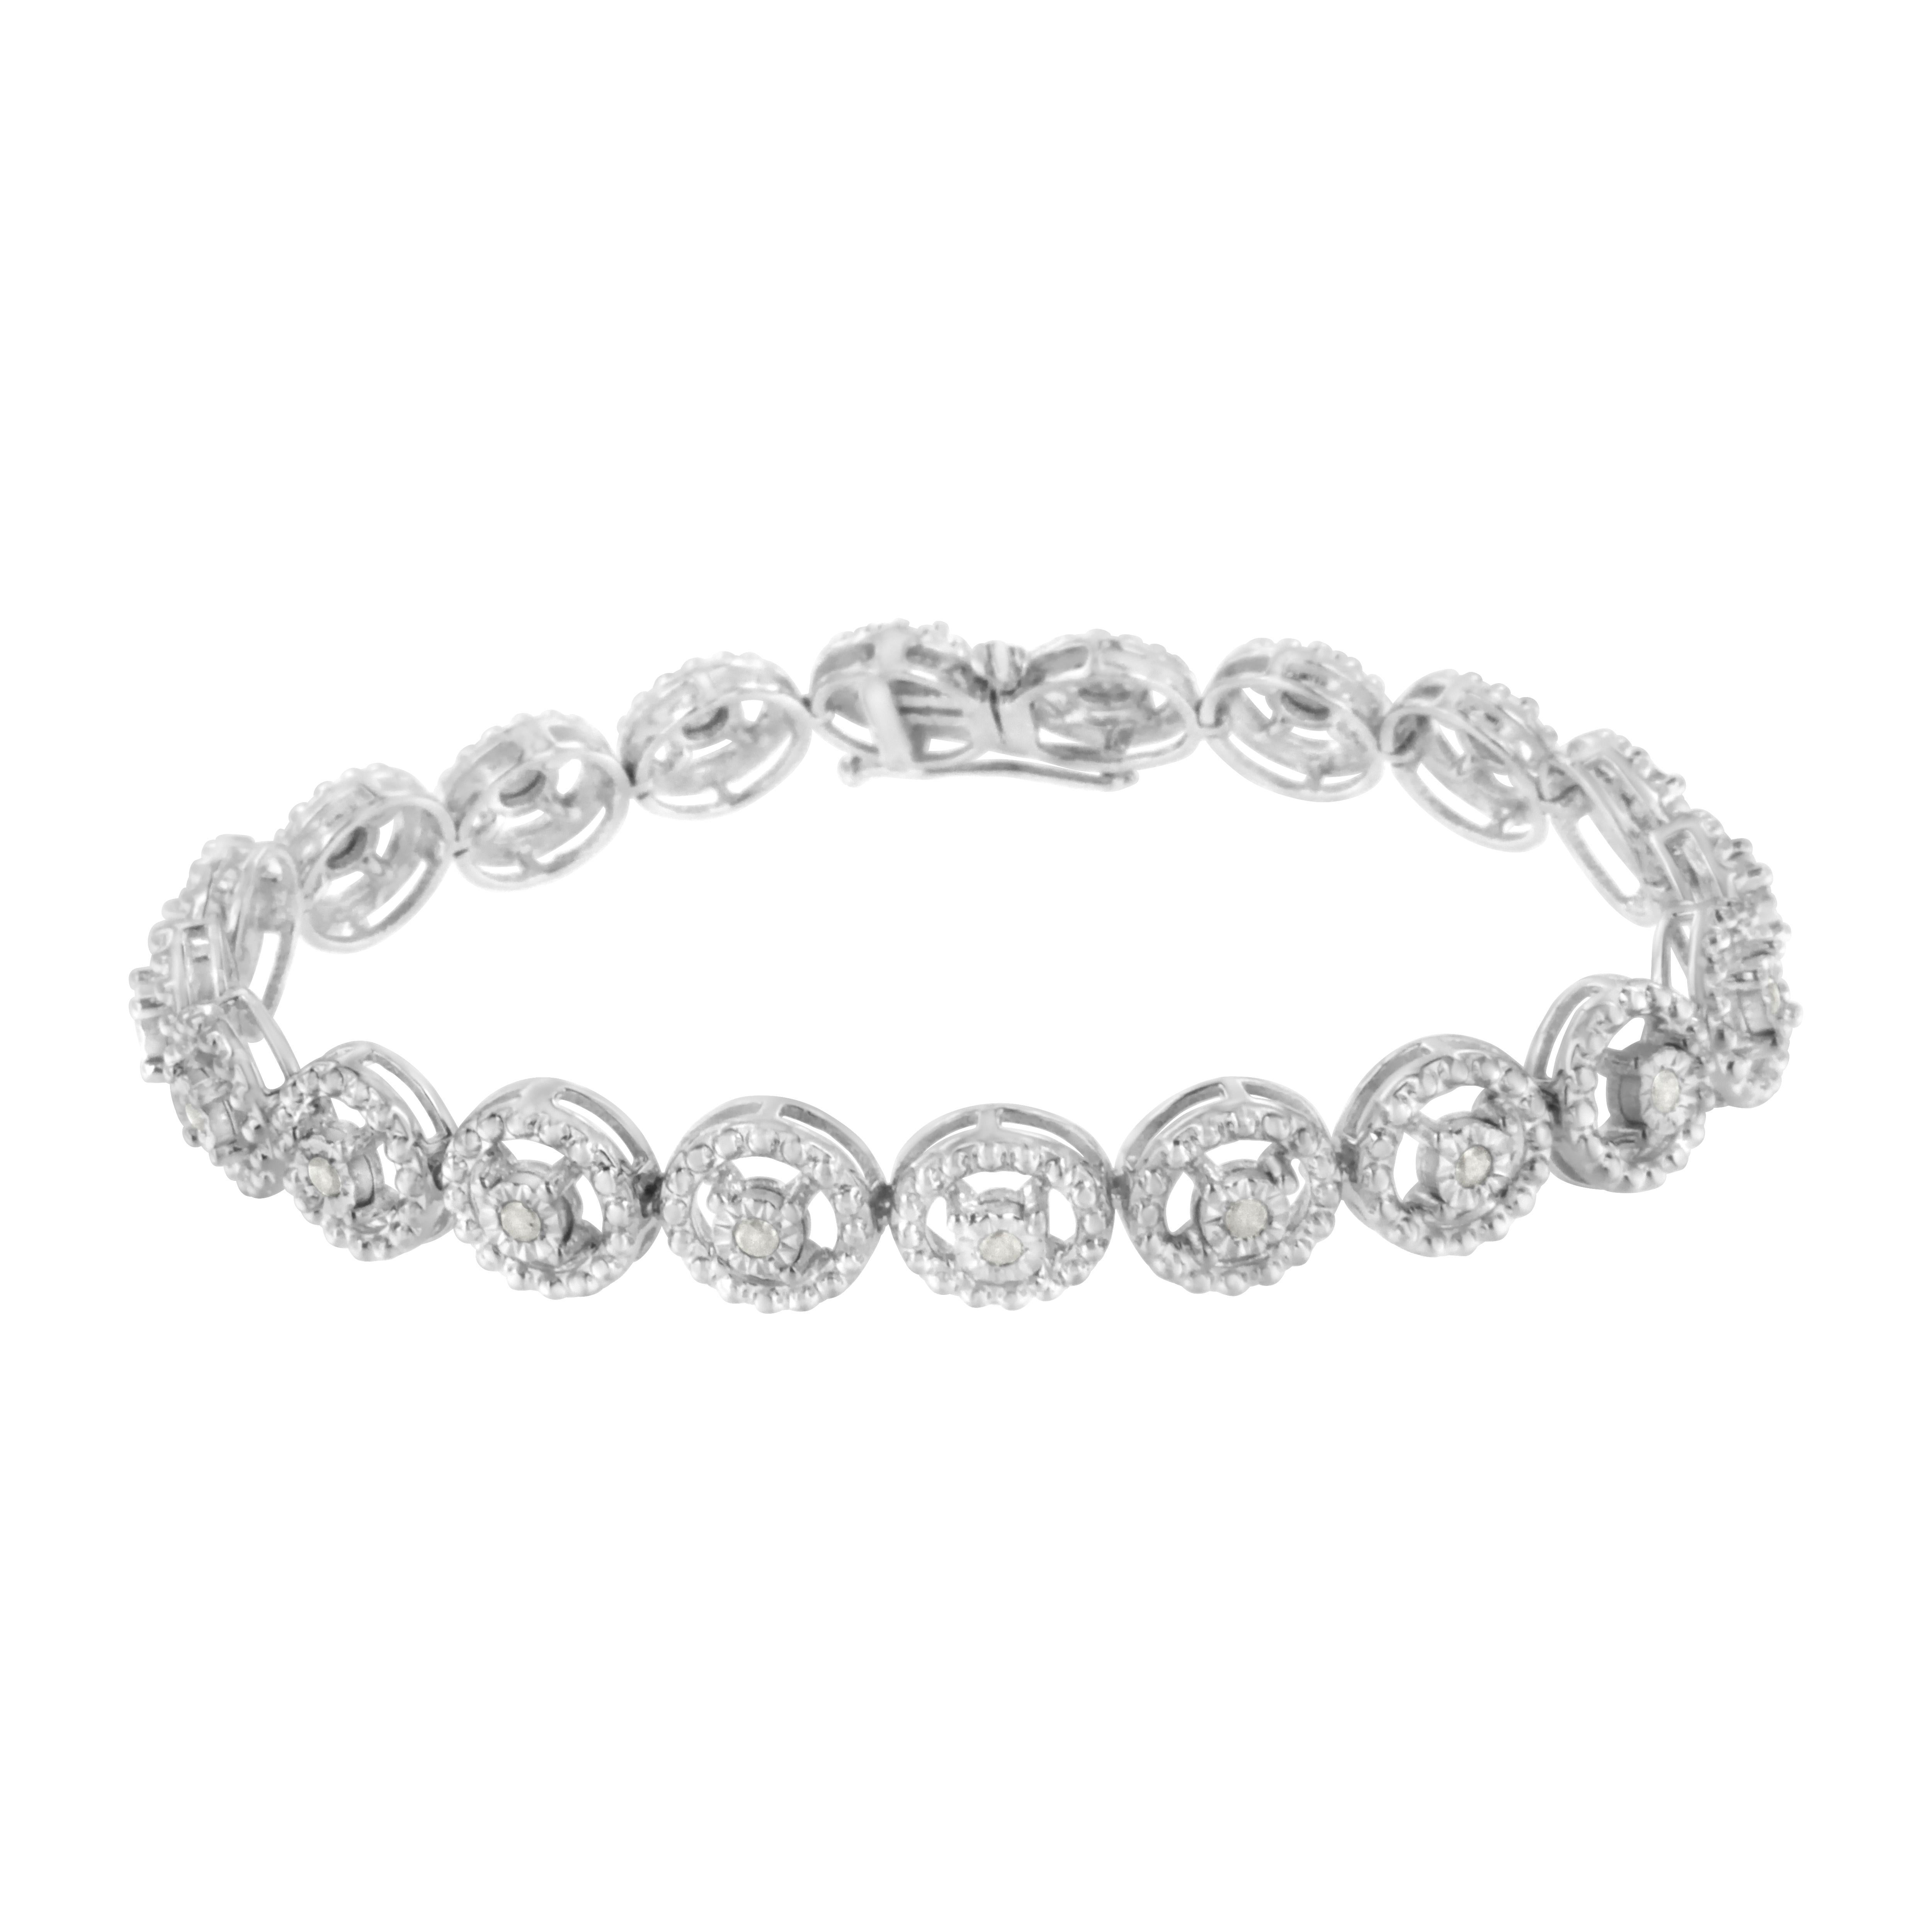 Your journey of love never ends. This sterling silver bracelet is a symbol of that sentiment, with interlocking circles of diamonds that wrap around in an endless loop. A timeless bracelet to show your never-ending love. Each genuine stone is